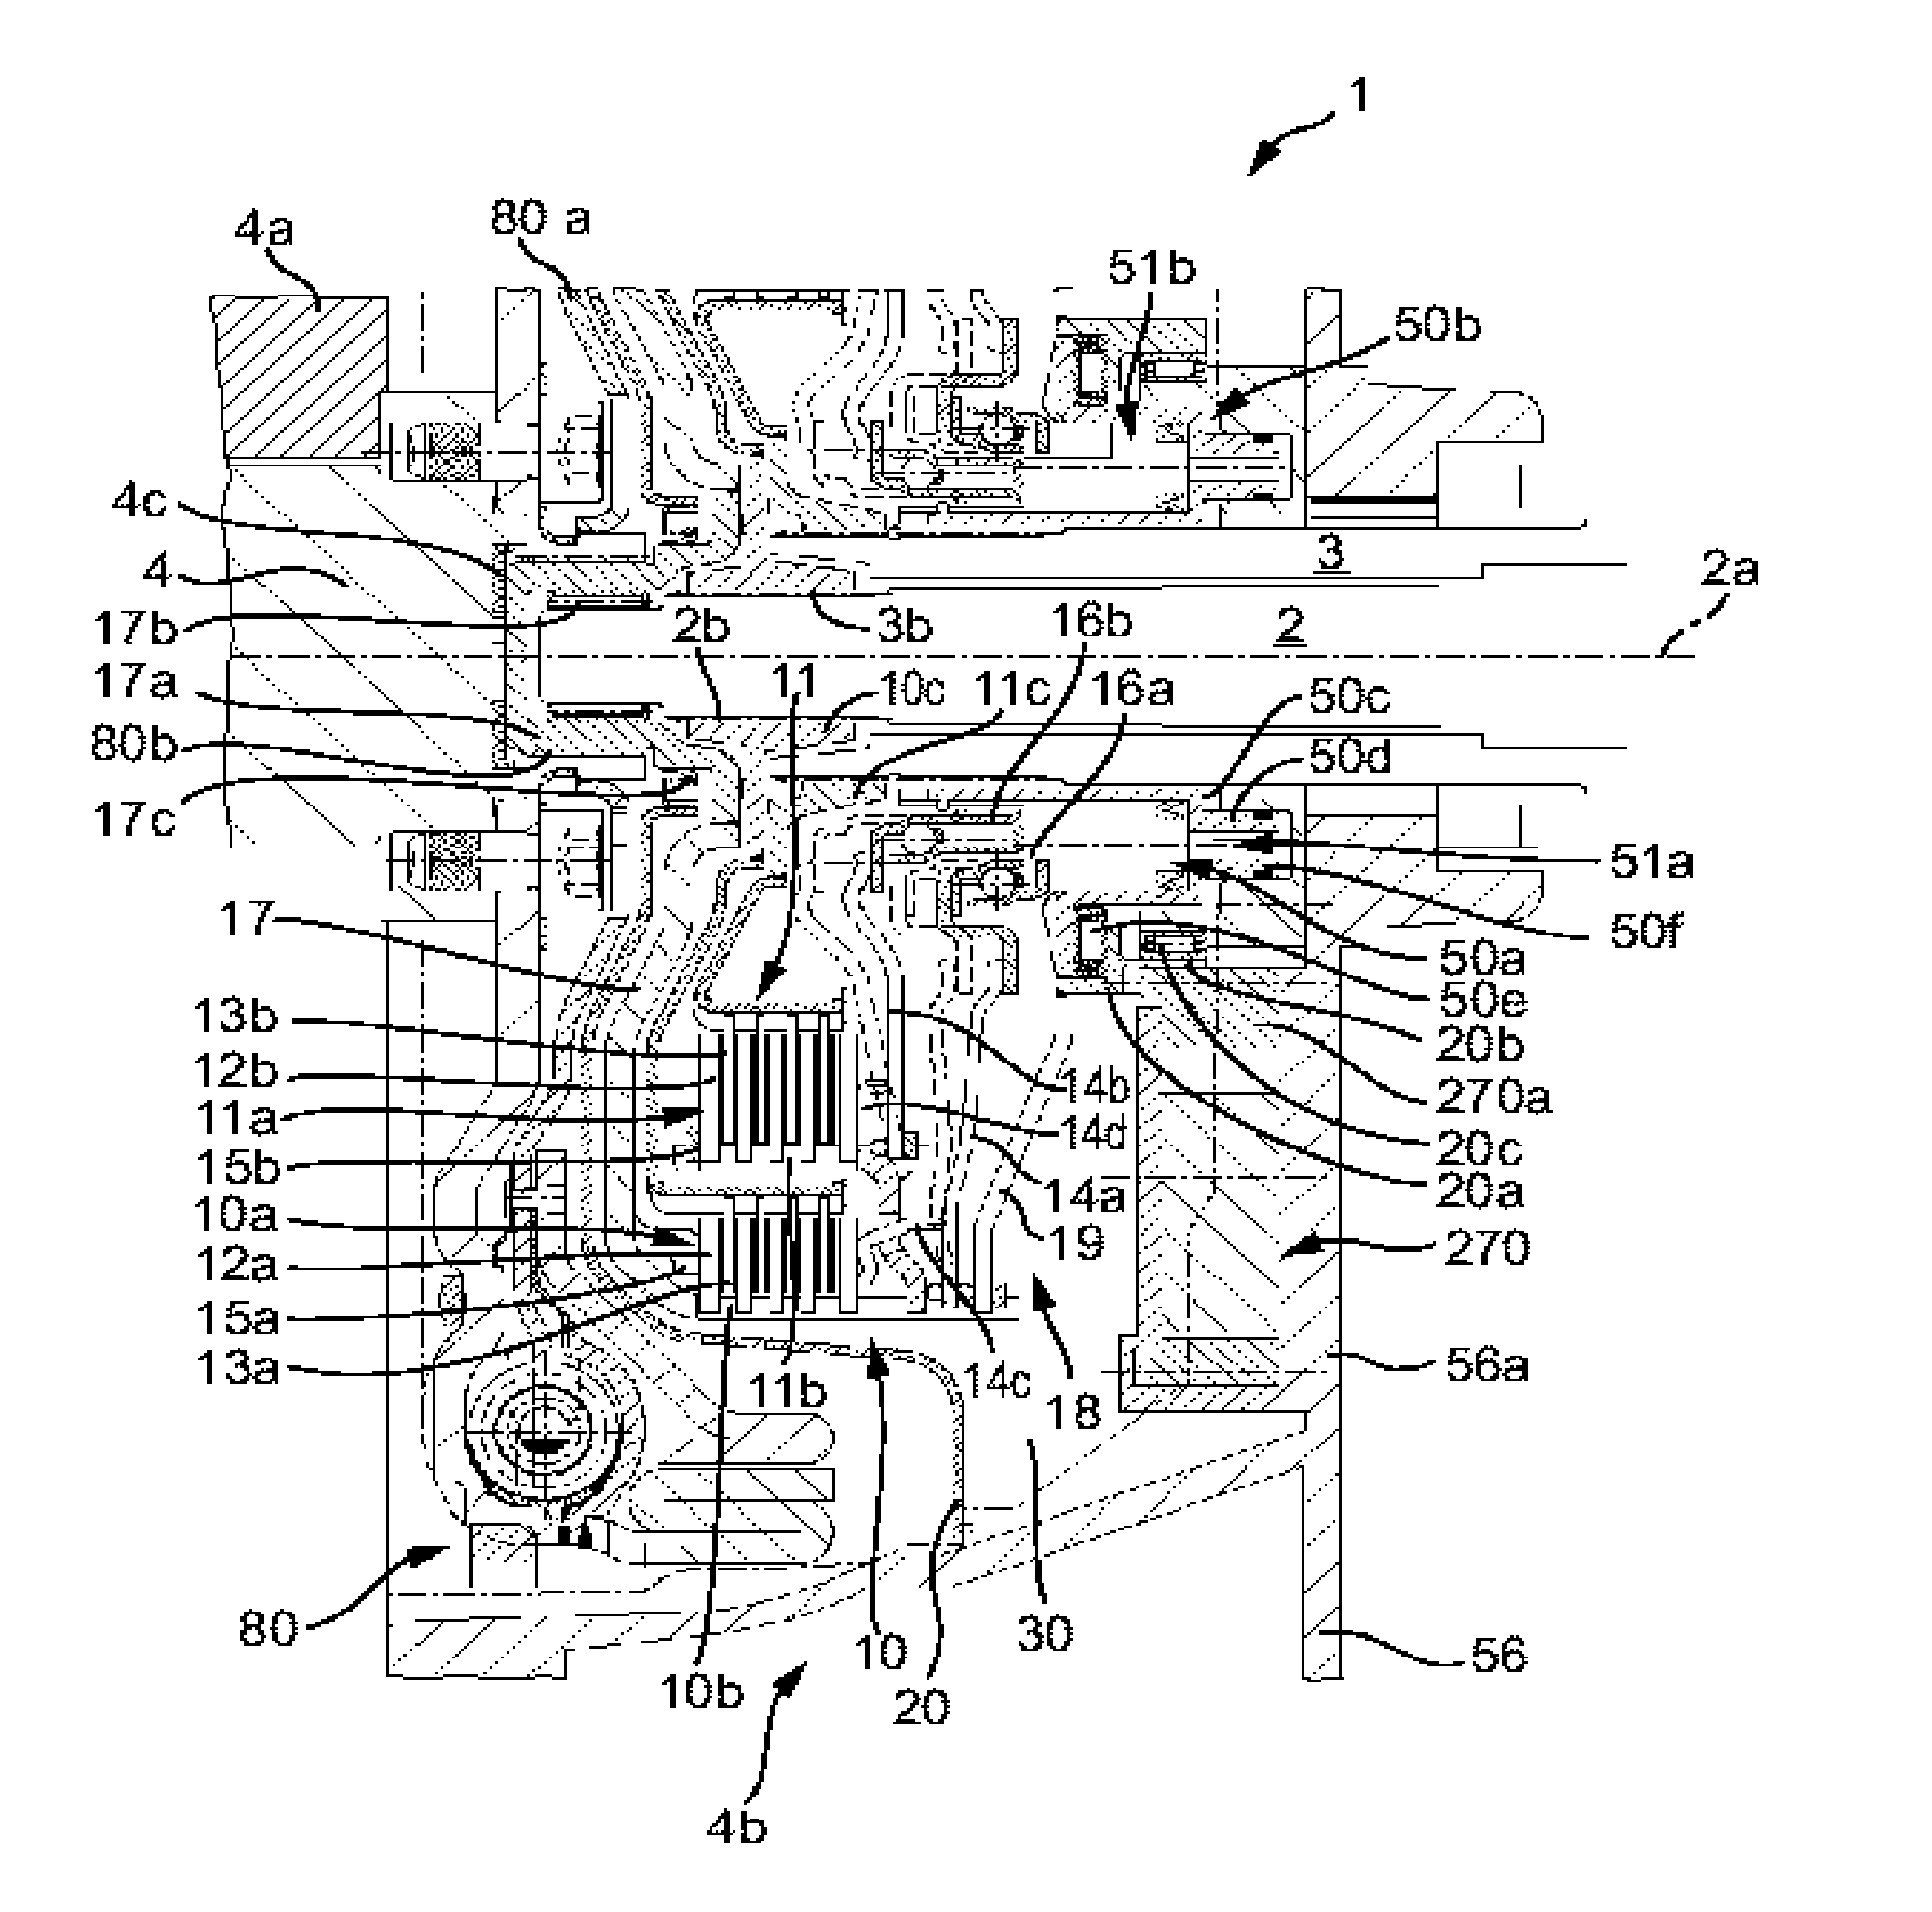 Torque transmitting unit and drive train for it